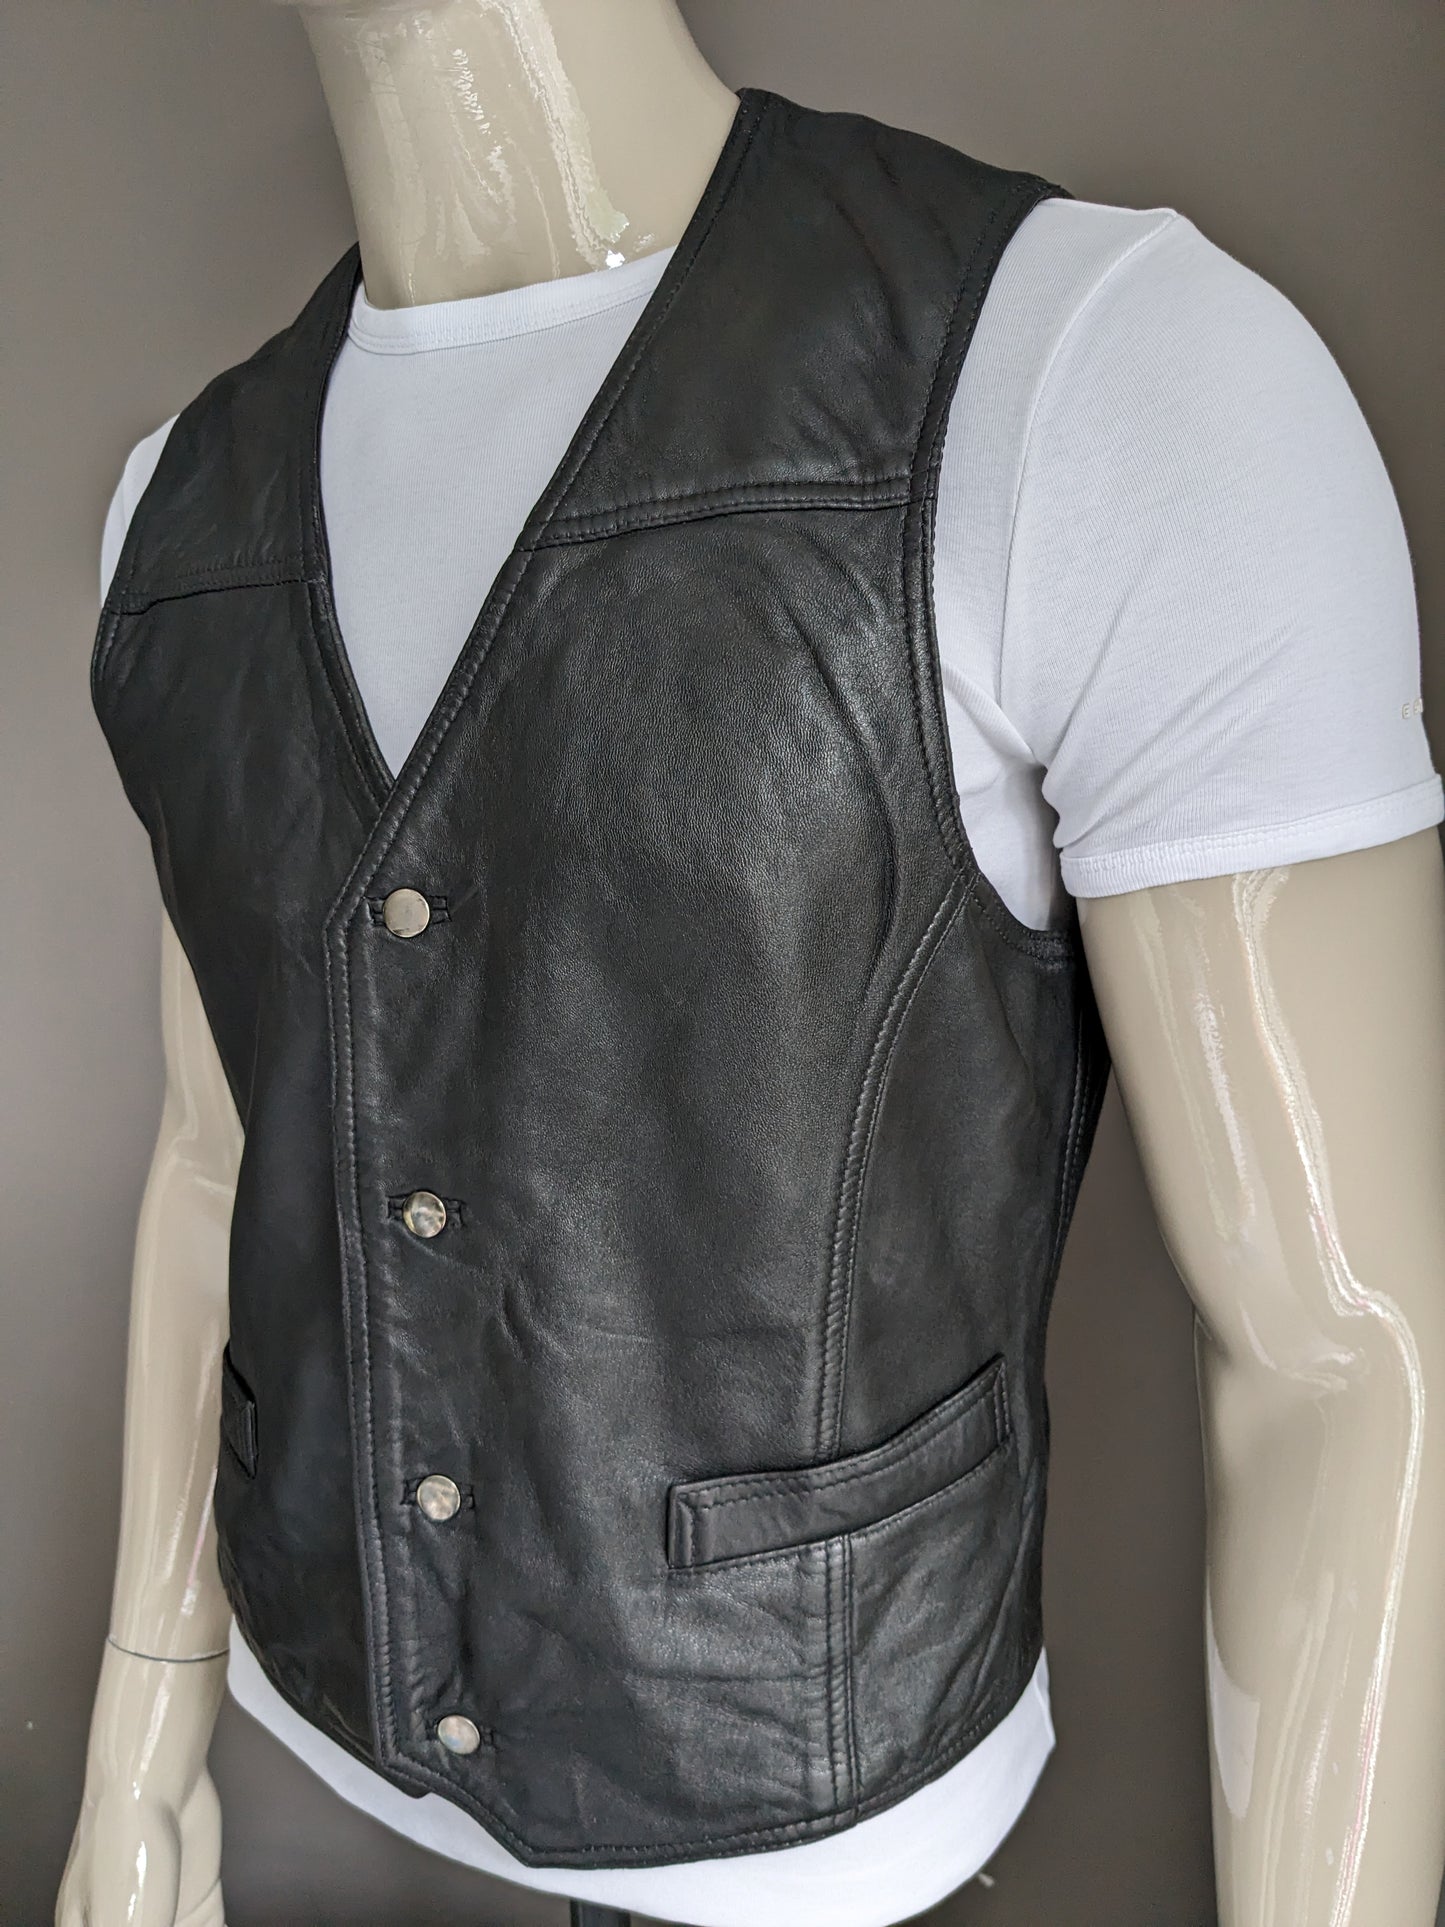 Vintage leather waistcoat with press studs. Double -sided leather. Black colored. Size M. #316.